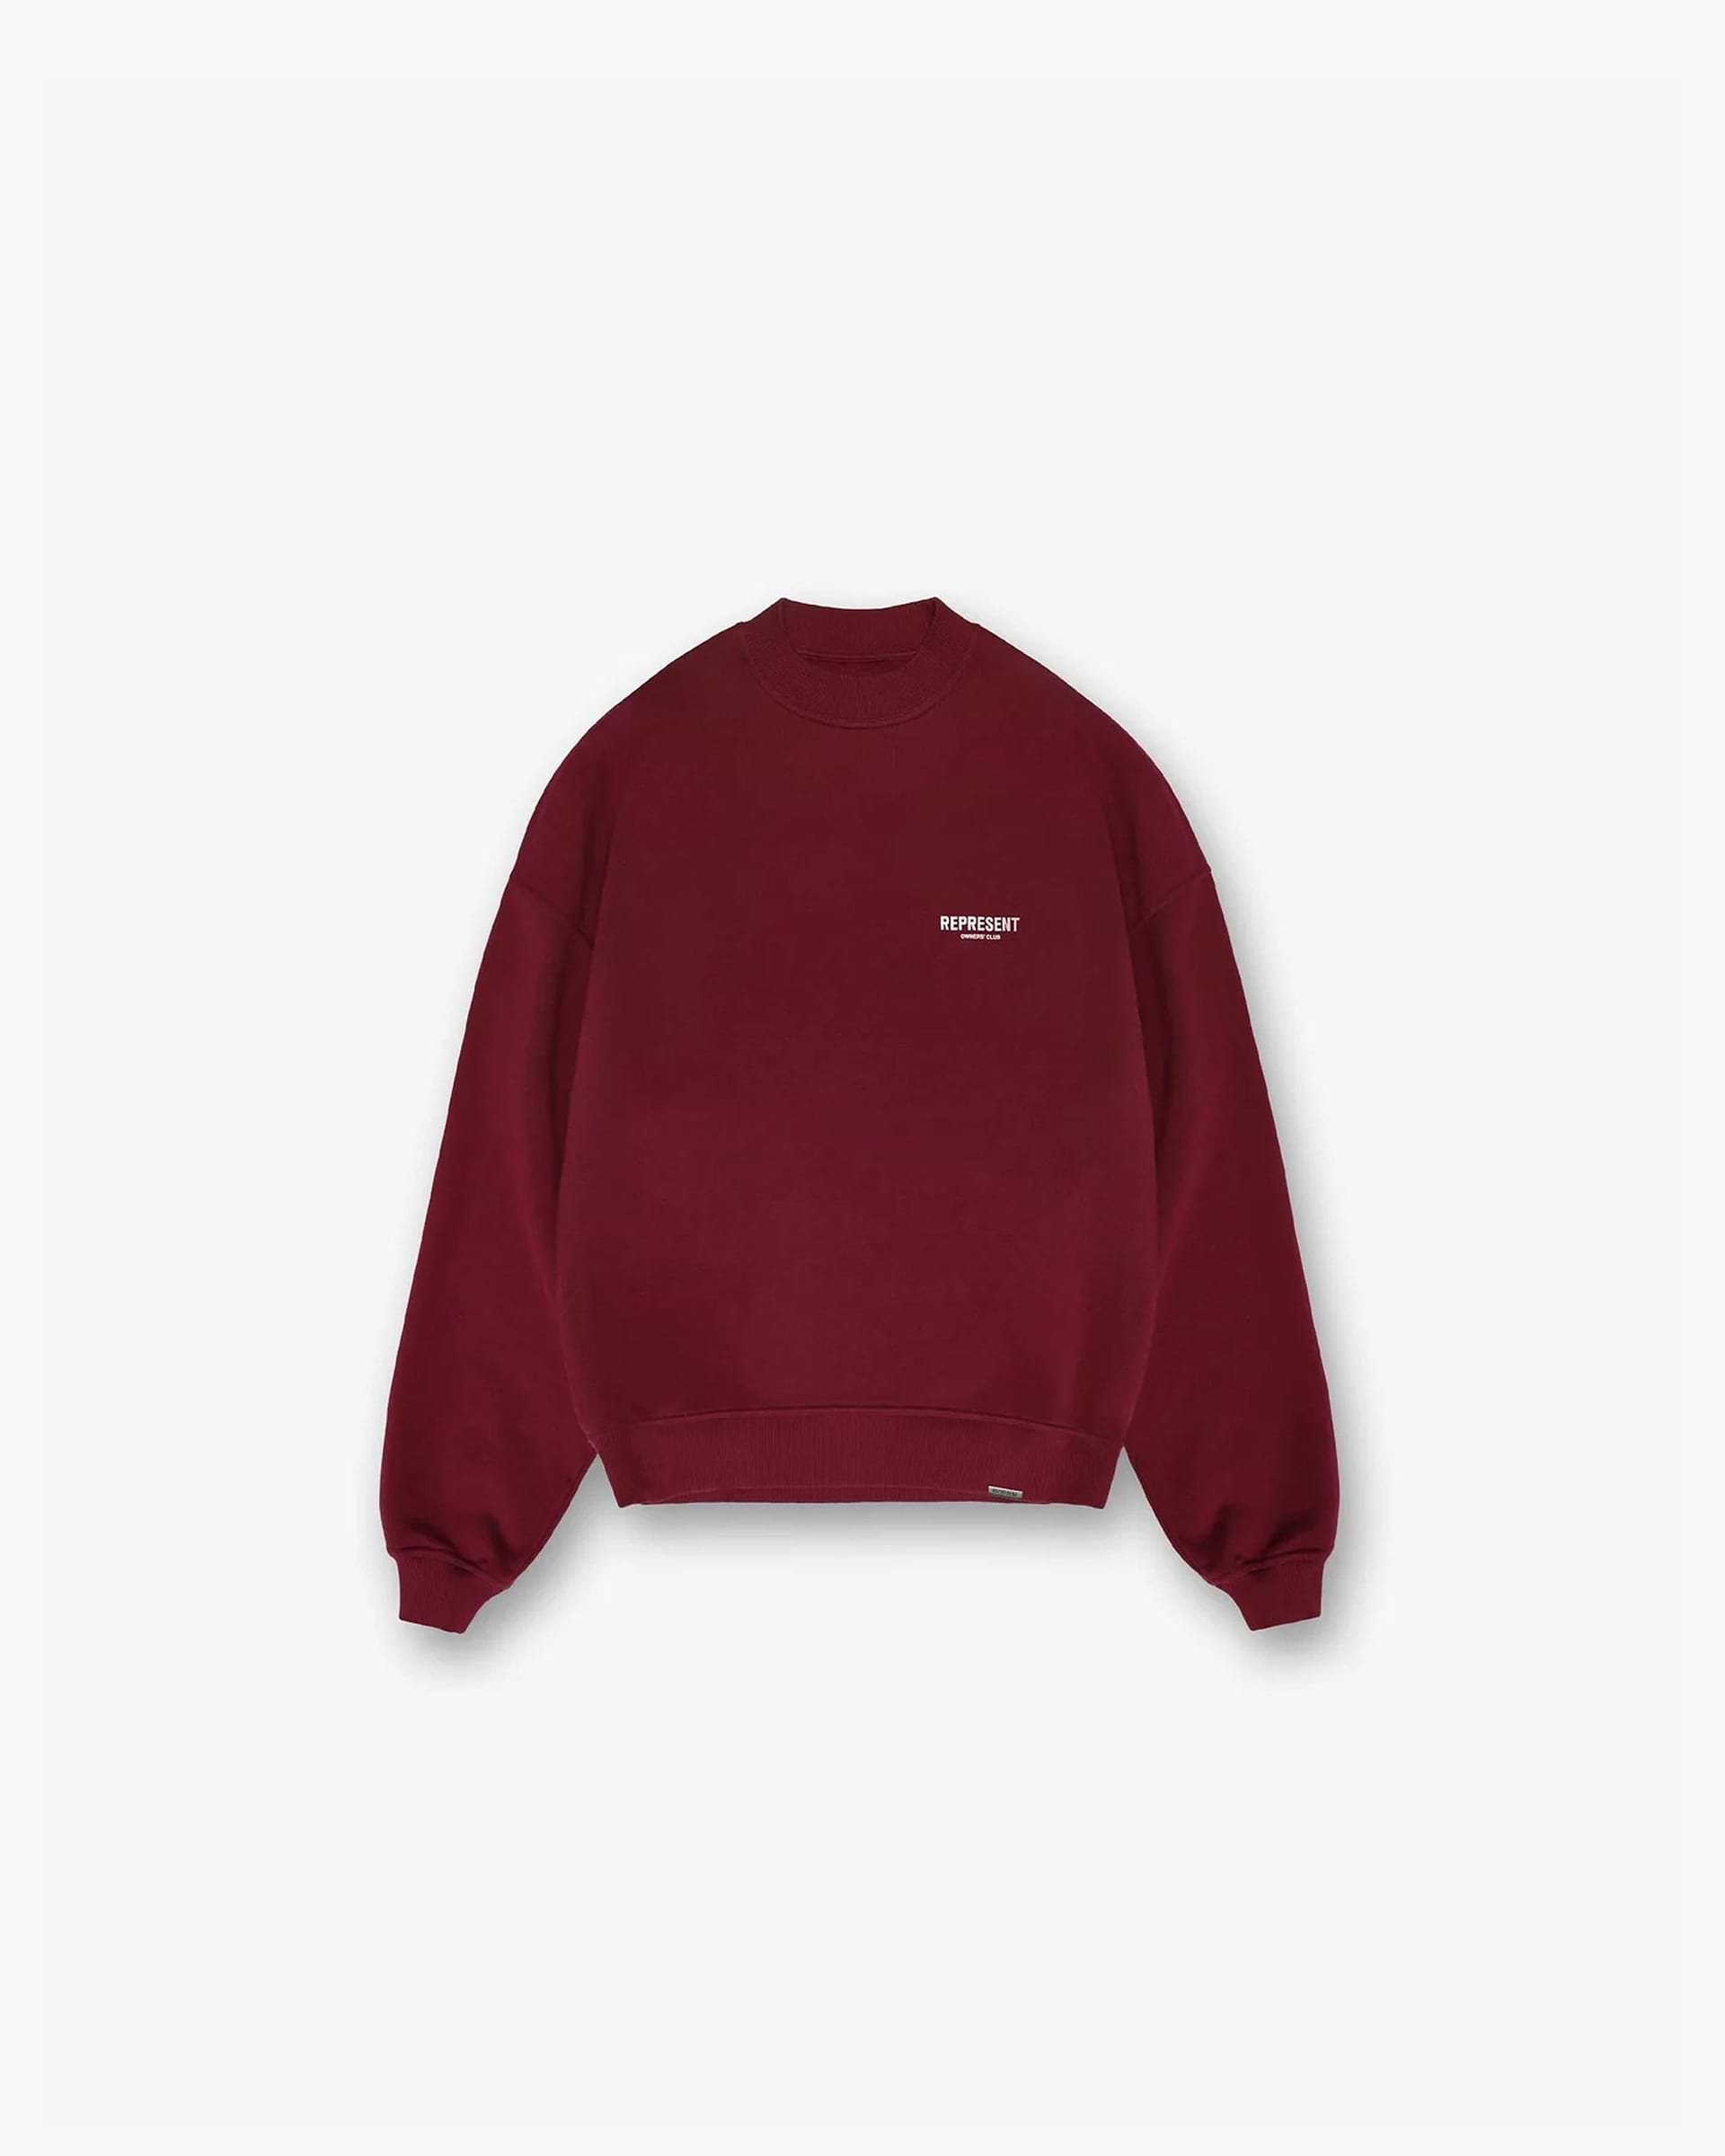 Represent Owners Club Sweater | Maroon Sweaters Owners Club | Represent Clo